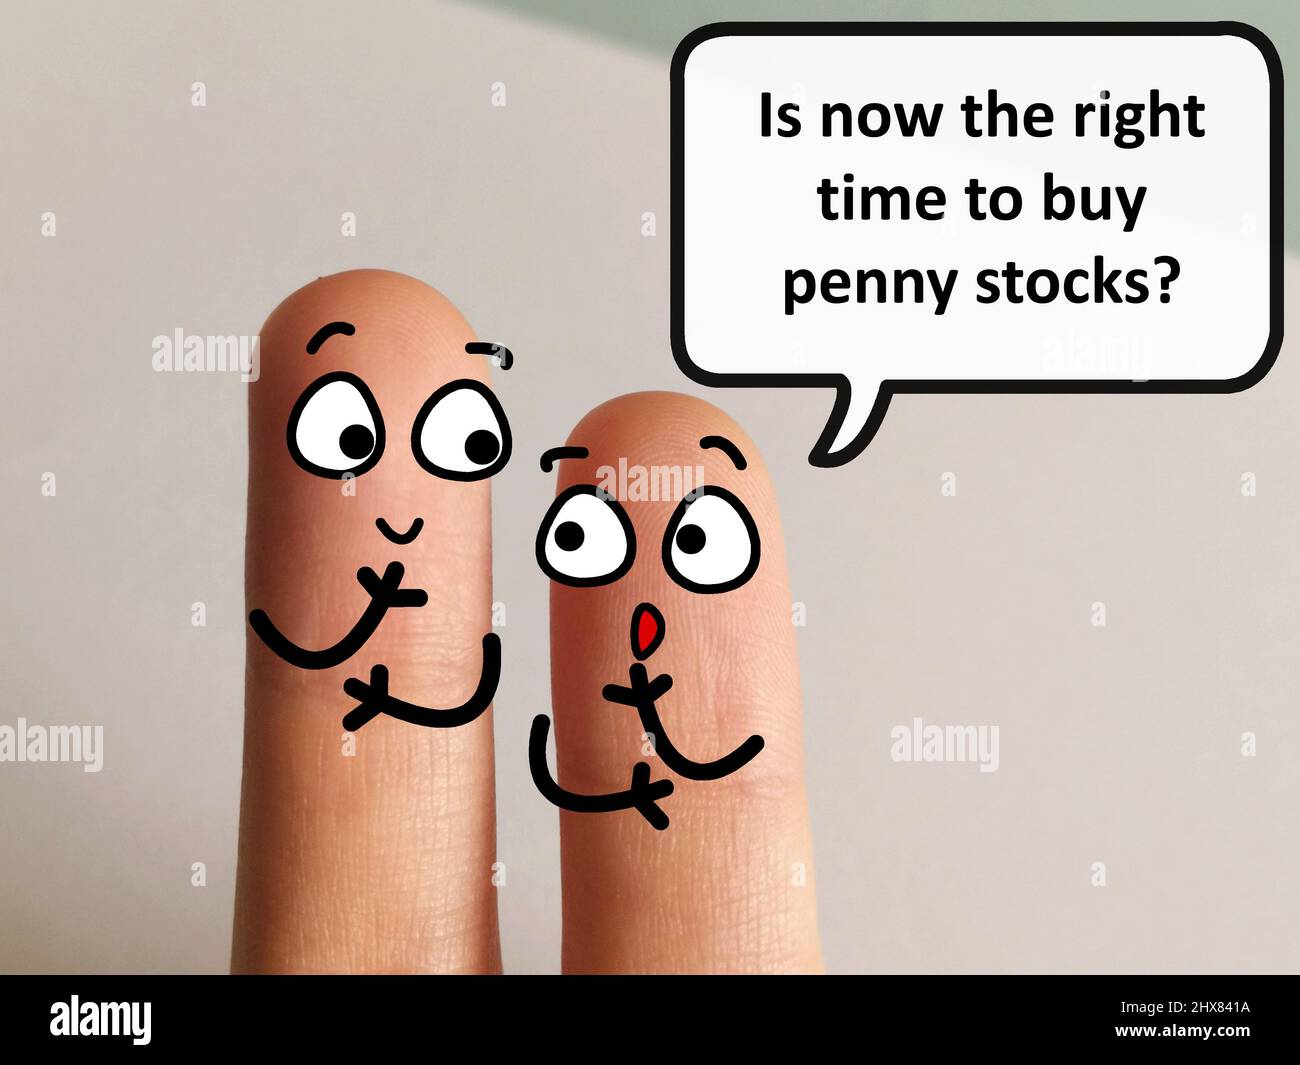 Two fingers are decorated as two person. They are discussing if it is the right time to buy penny stocks. Stock Photo